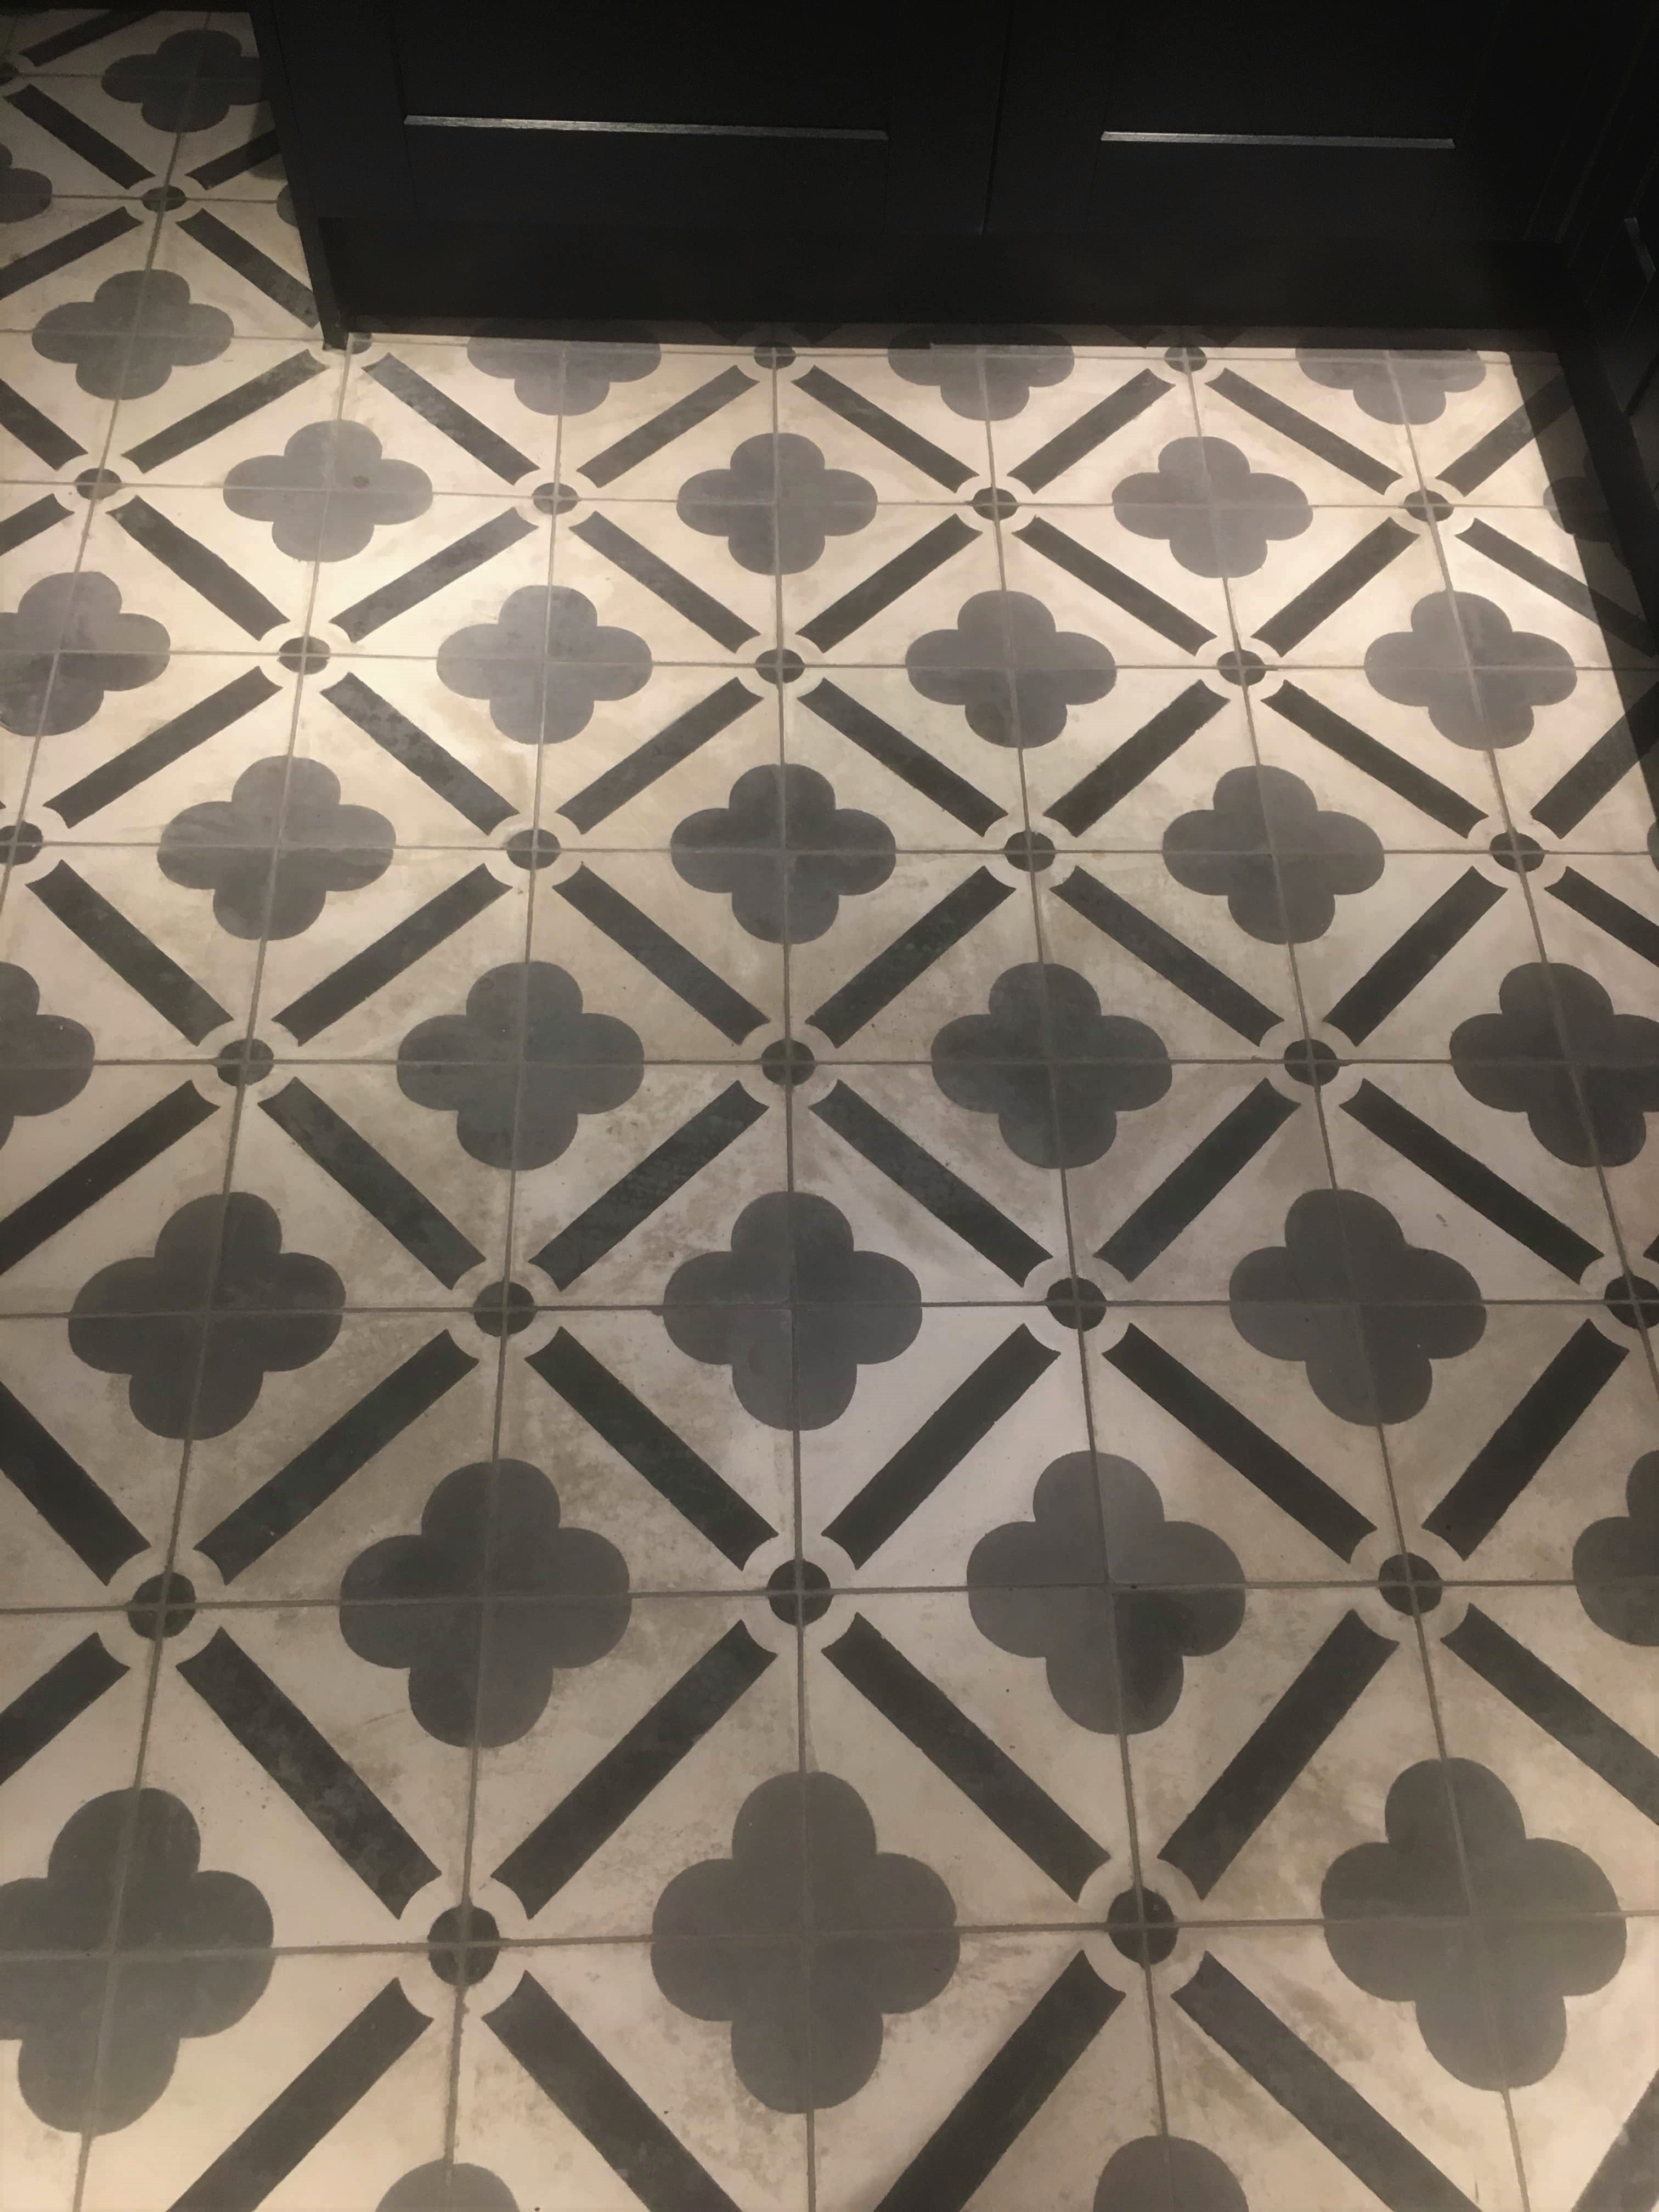 Encaustic Cement Tiles Before Cleaning in Chipping Norton